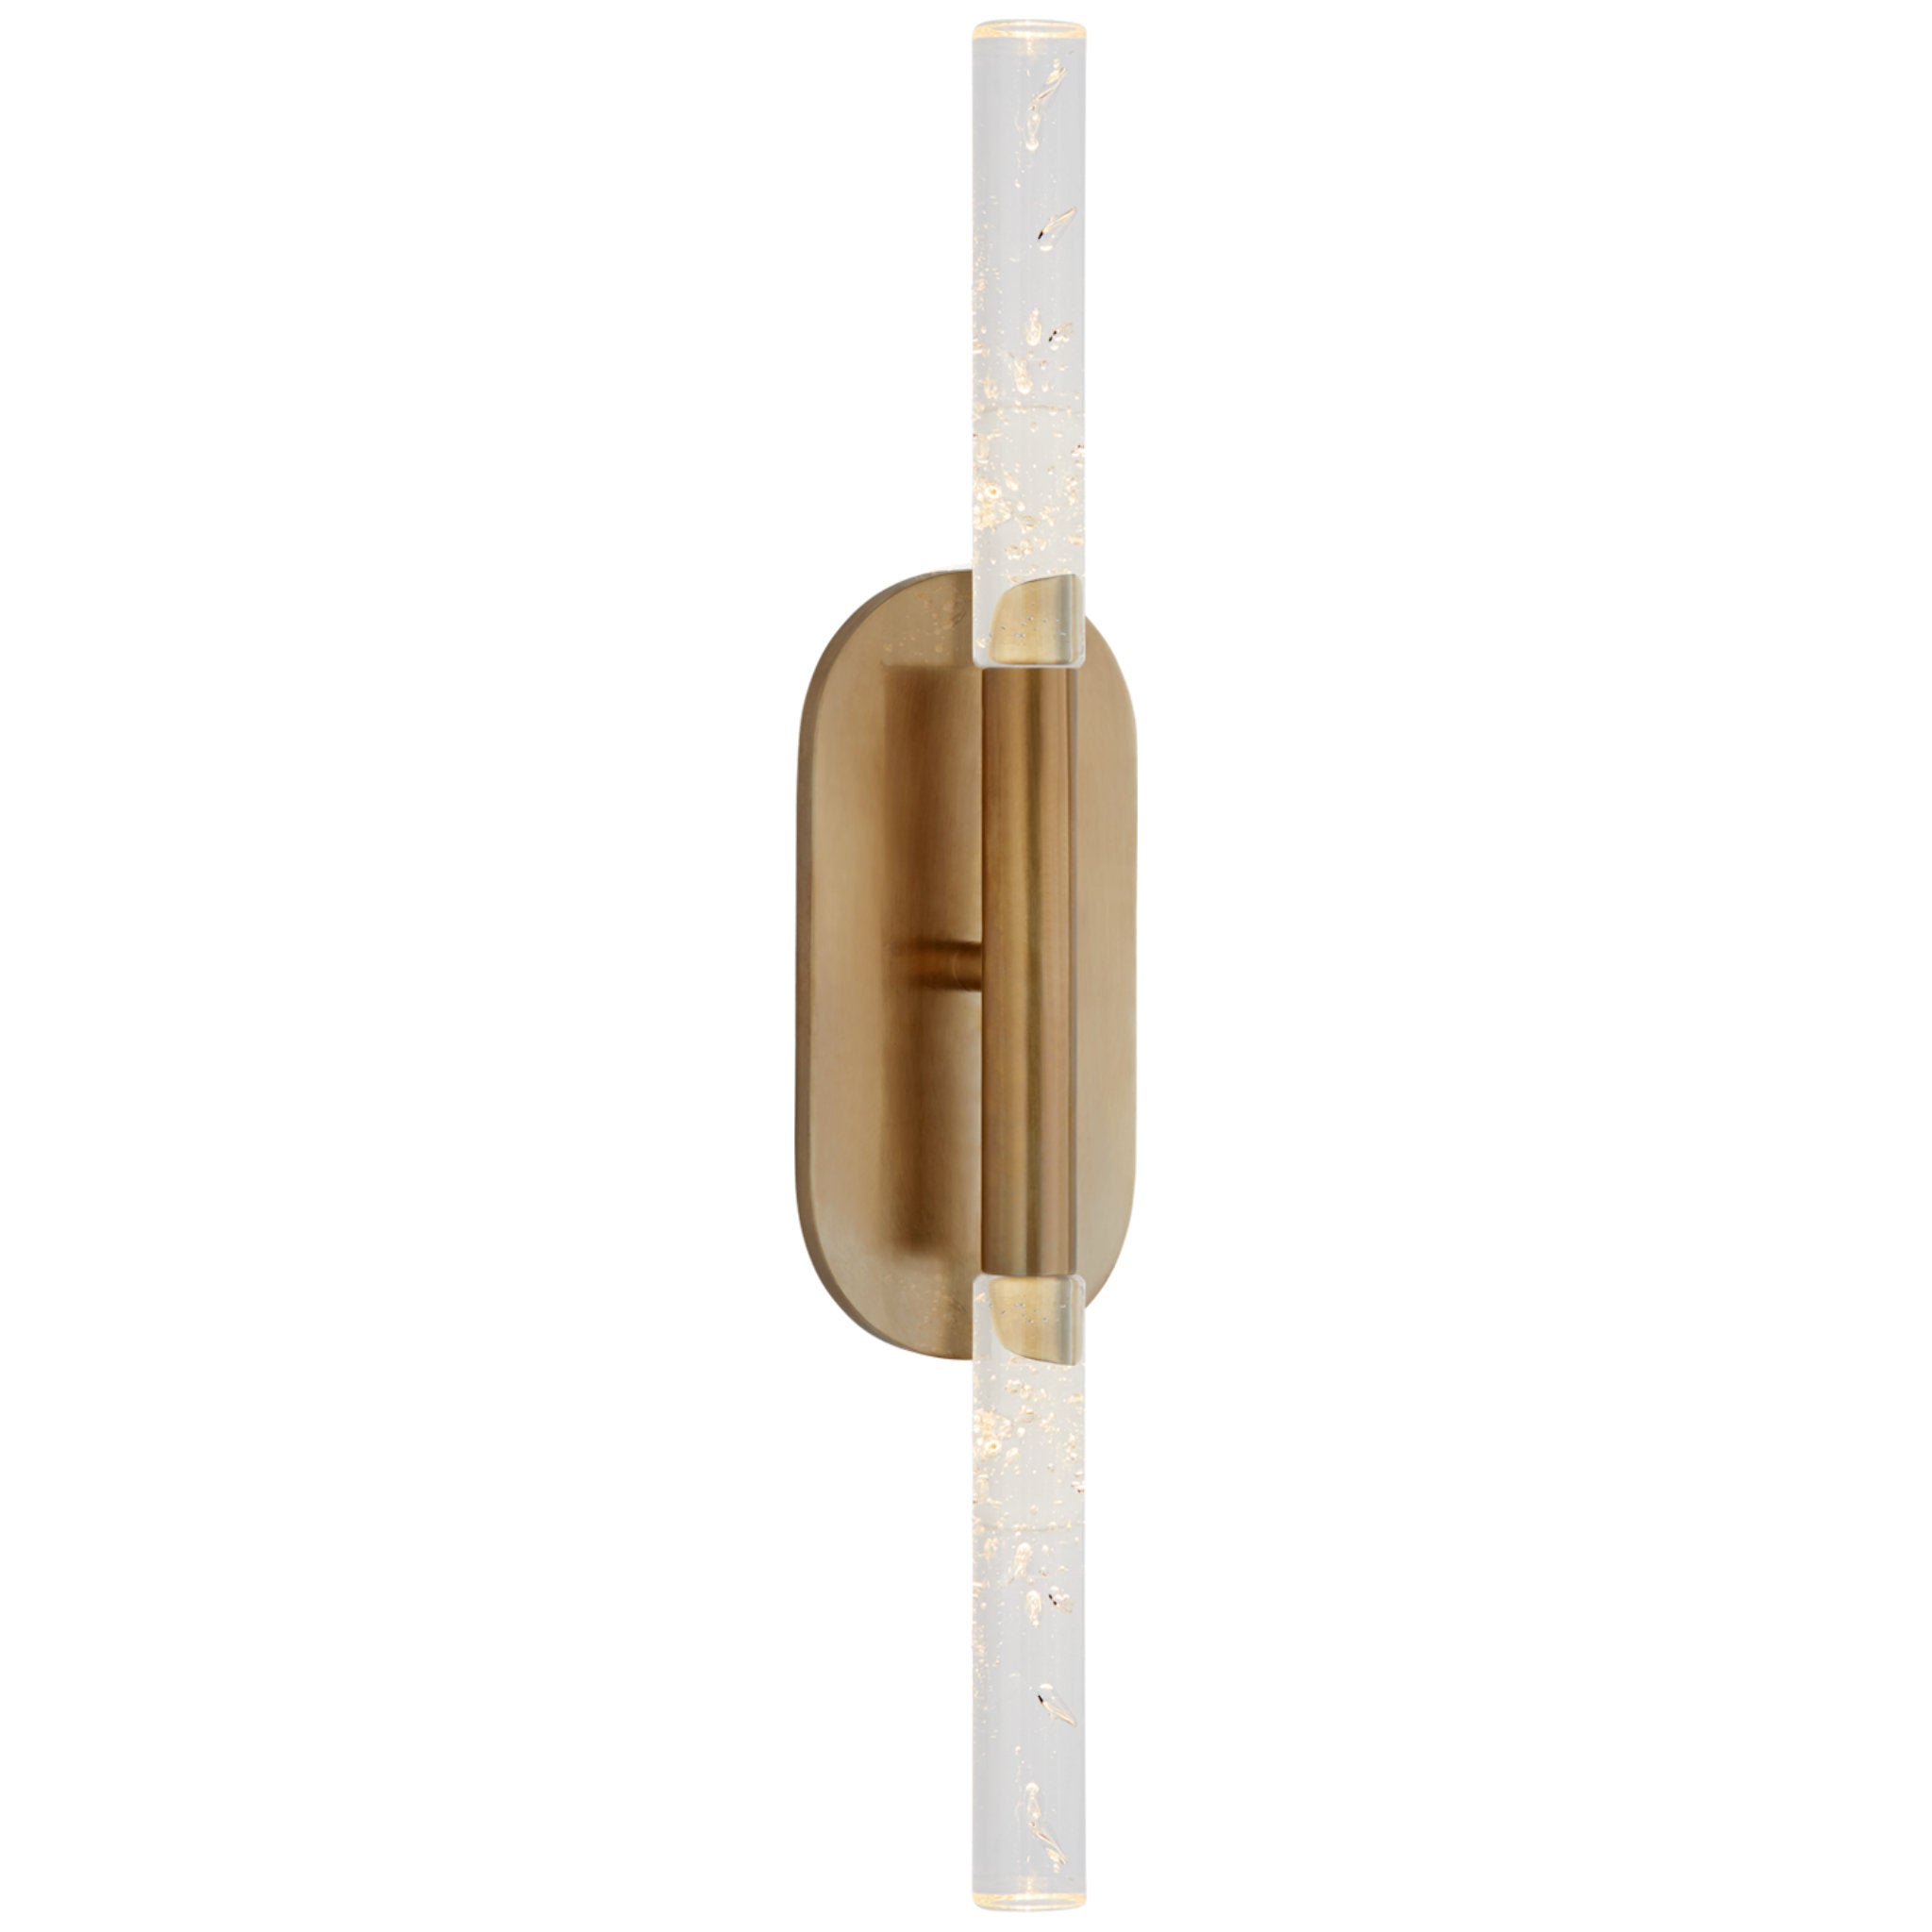 Kelly Wearstler Rousseau Medium Vanity Sconce in Antique-Burnished Brass with Seeded Glass